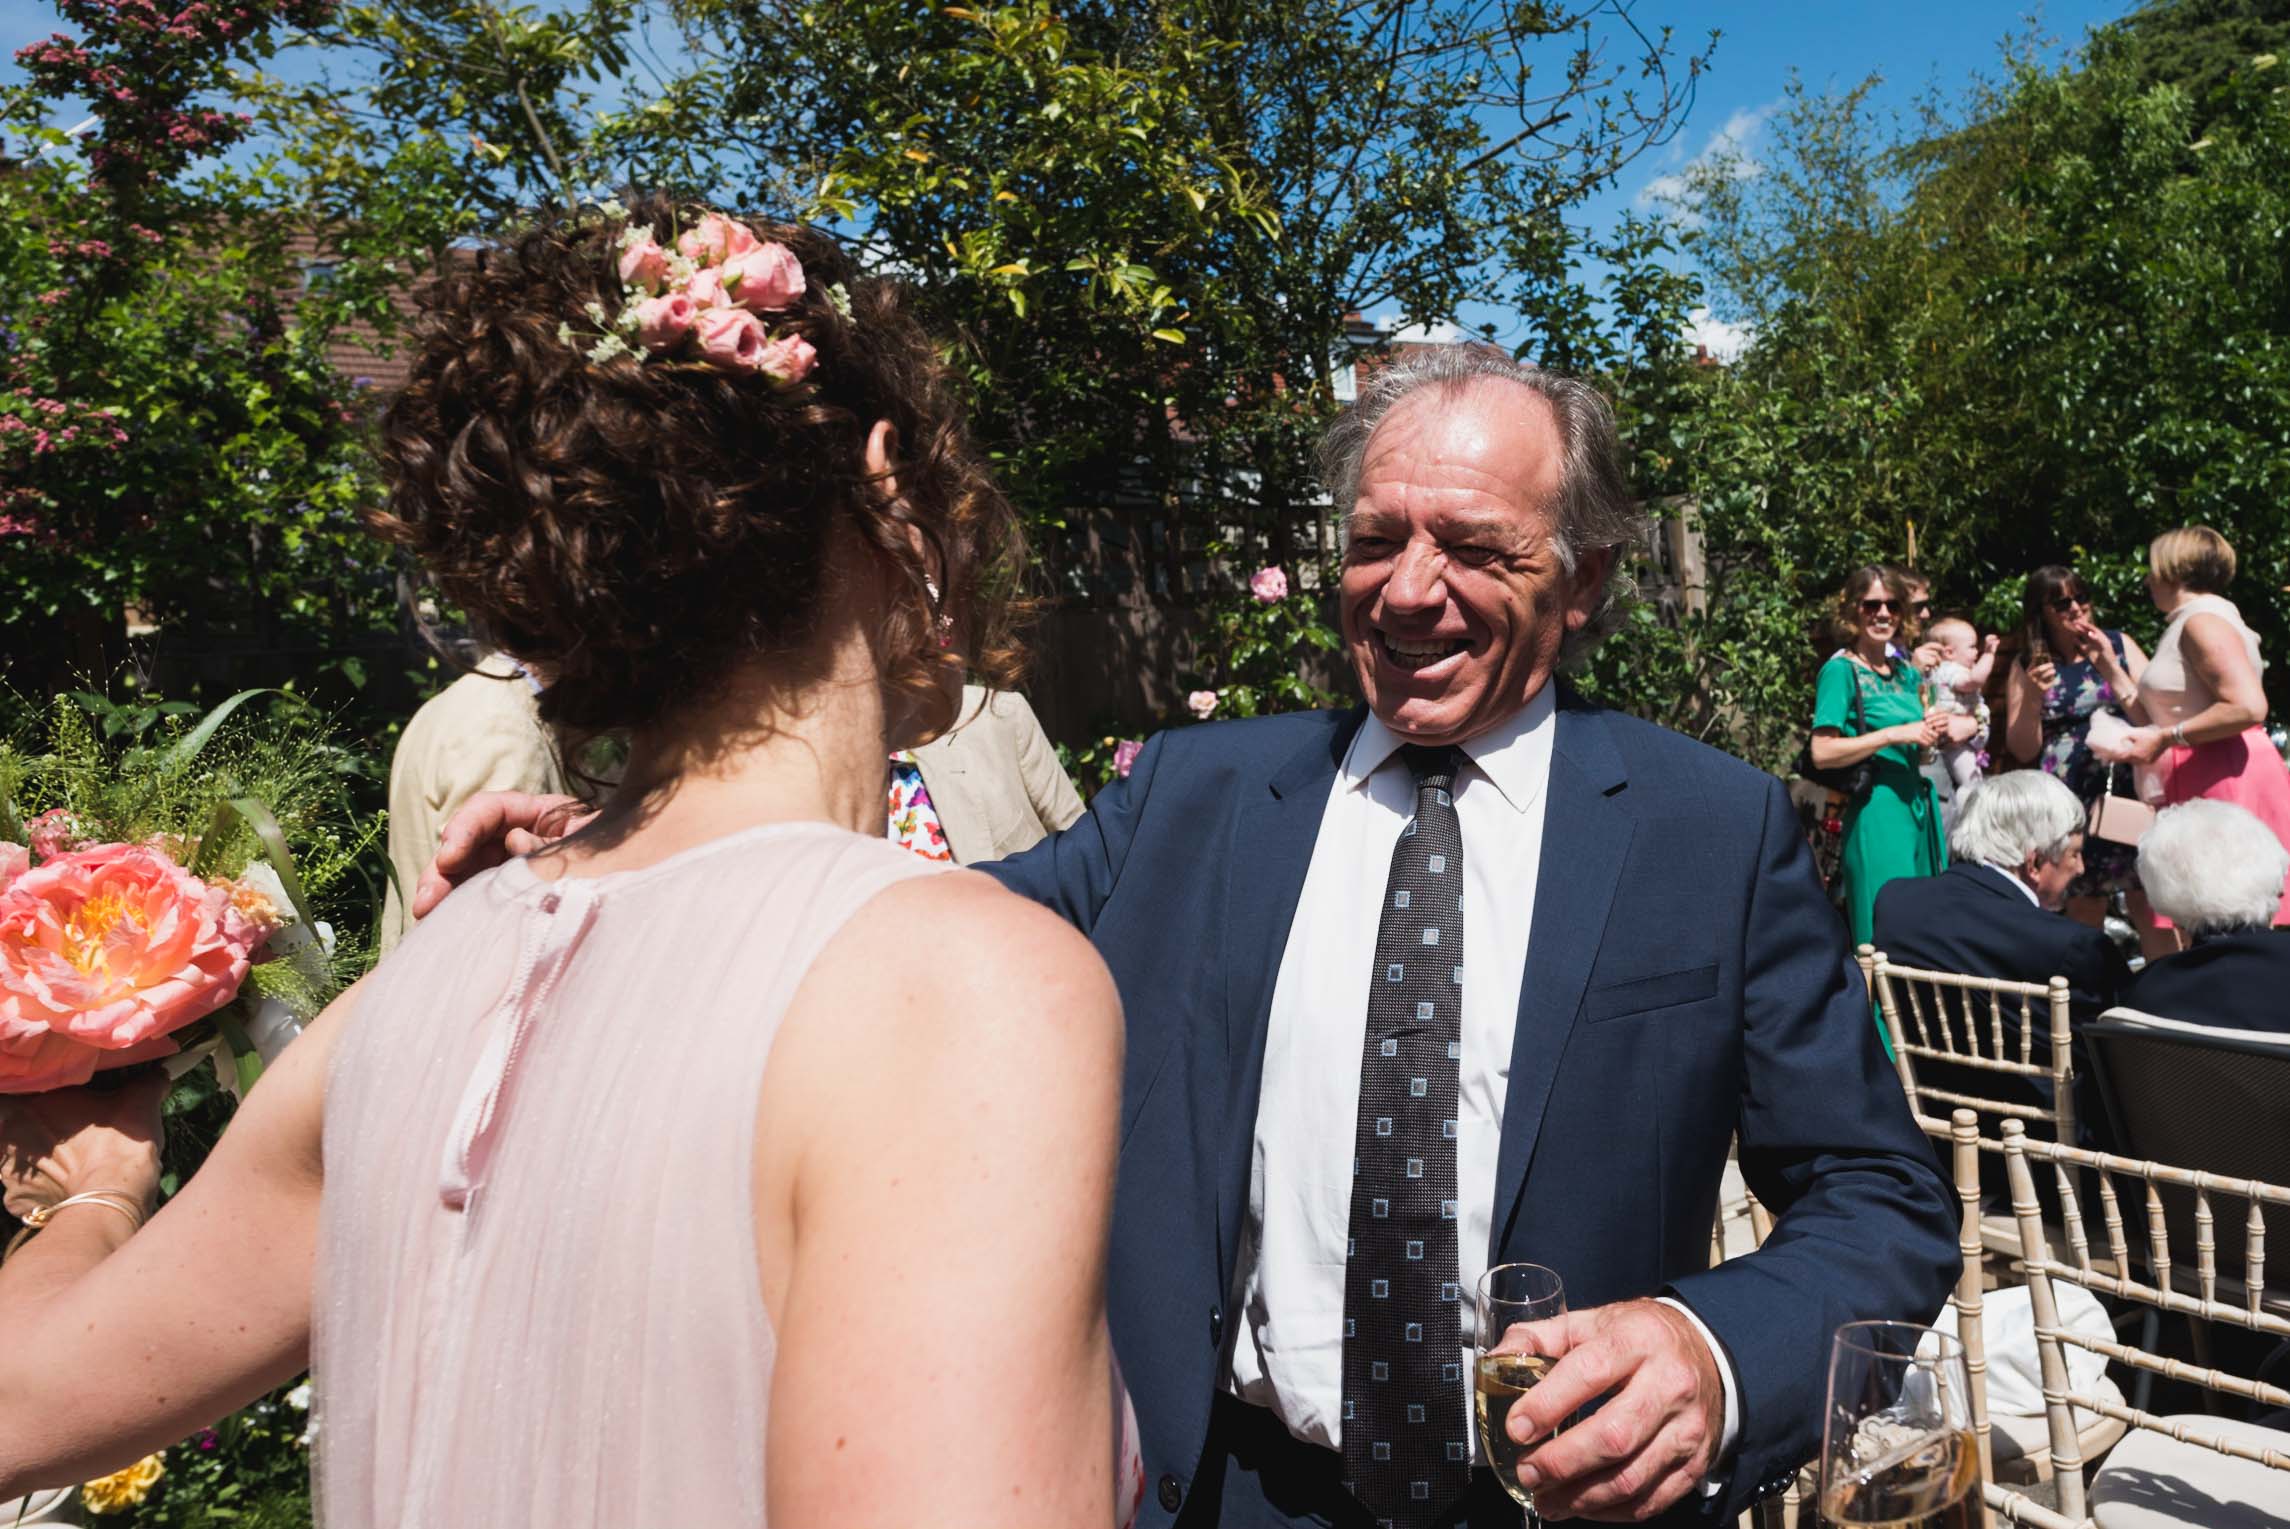 carine bea photography, guest in a wedding at back garden, documentary photographer